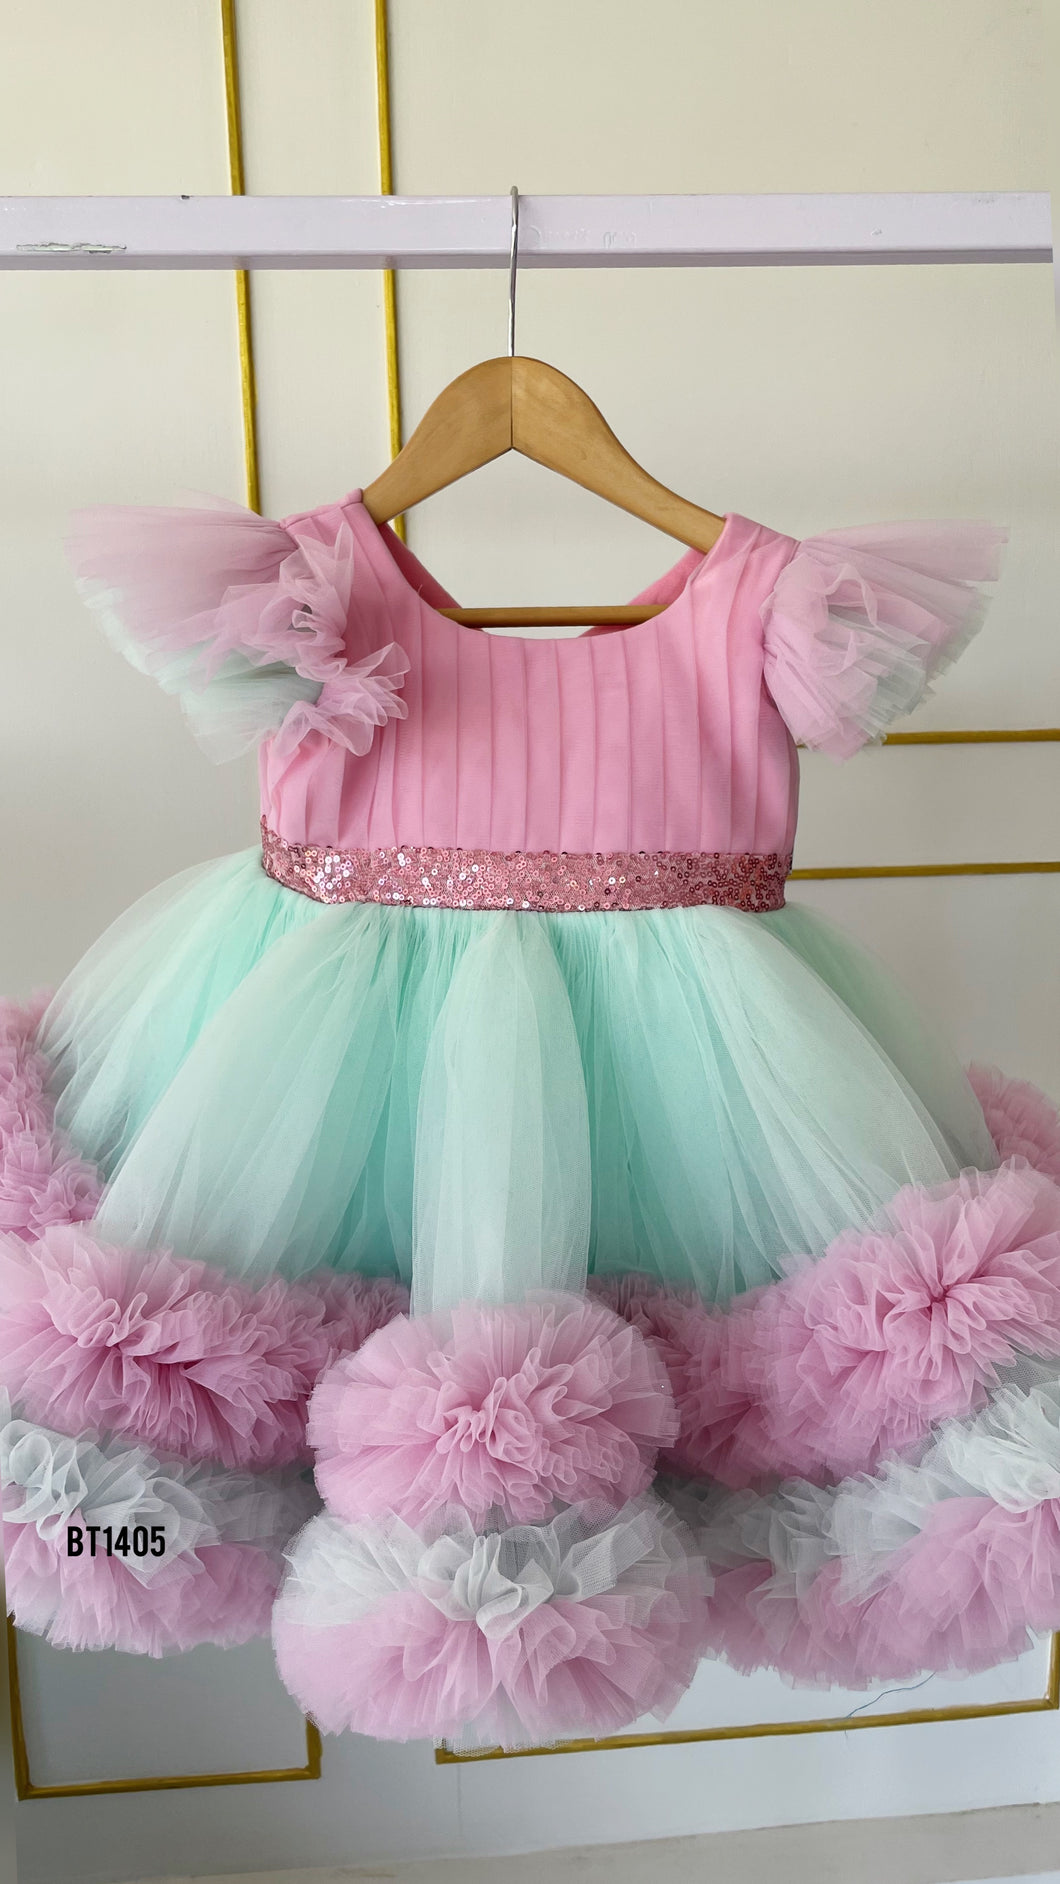 BT1405 Candyfloss Dream Dress - Twirl into the Party in Pastel Perfection!